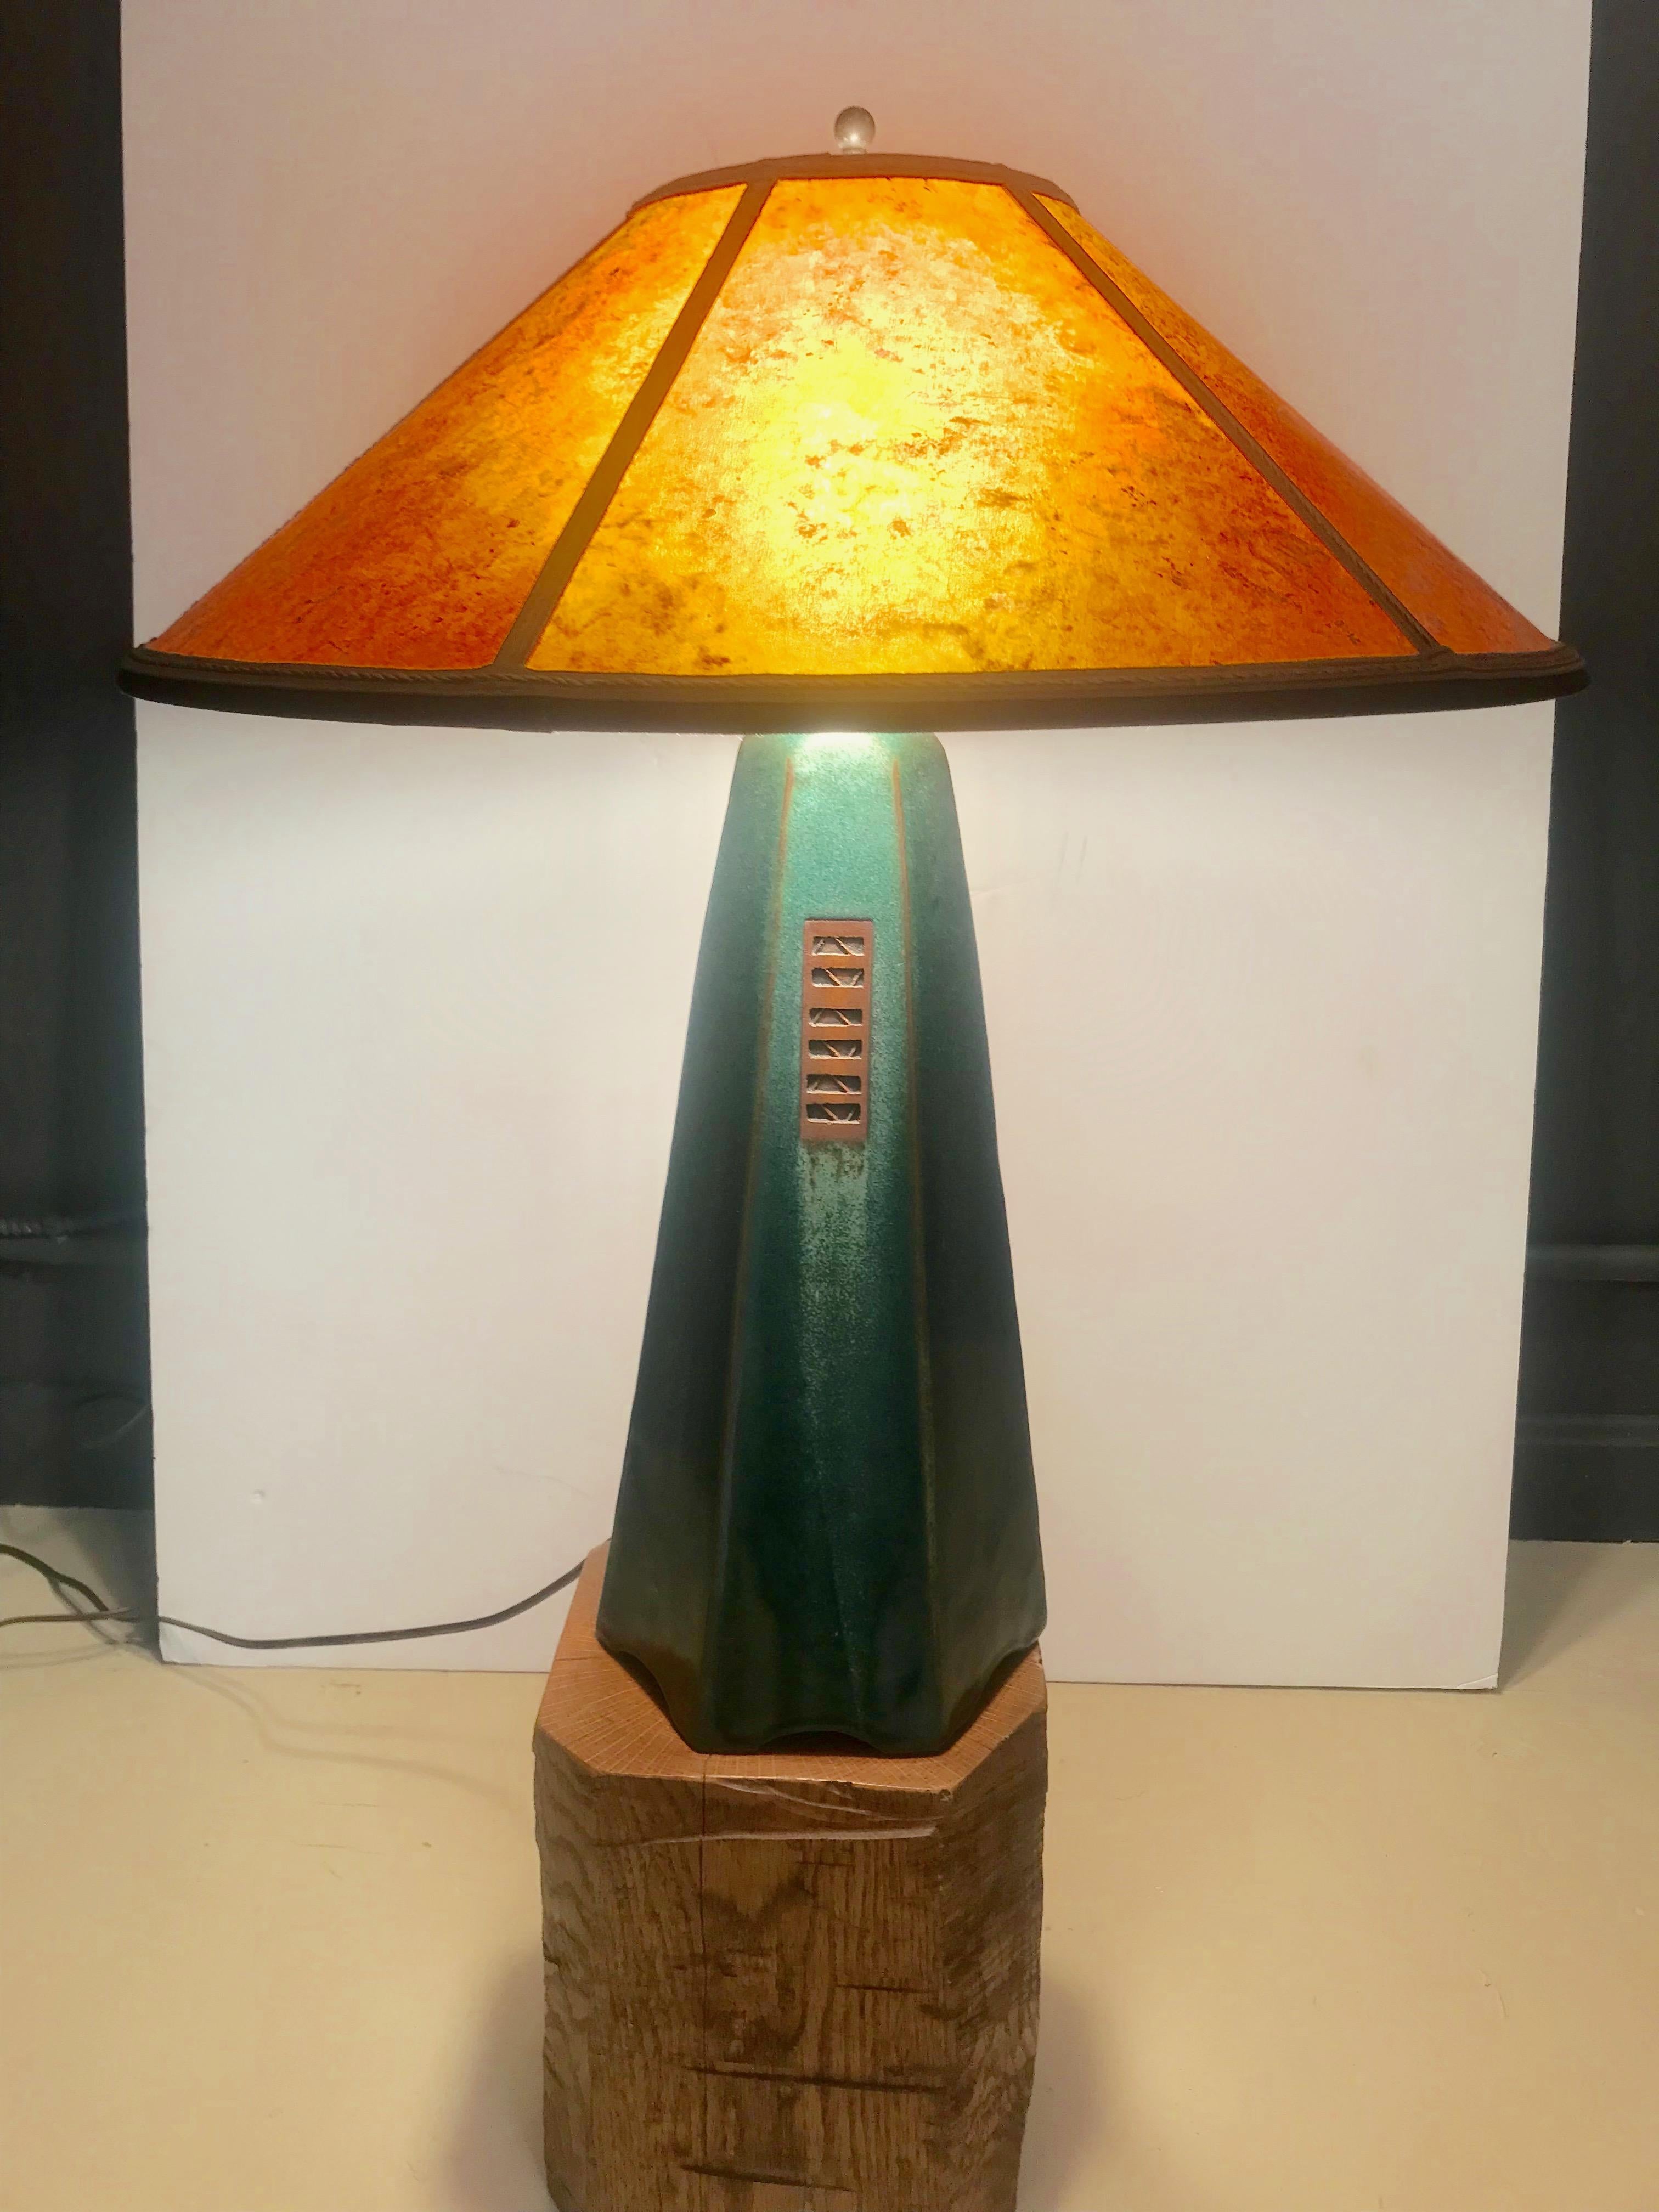 A beautiful Jim Webb original table lamp from his Hopewell Collection in a moss glaze with amber mica shade.
Dimensions:
Footprint: 7.25 x 7.25 
Height of base without hardware 15.25 total height to top of finial 22
Shade:
Bottom width diameter